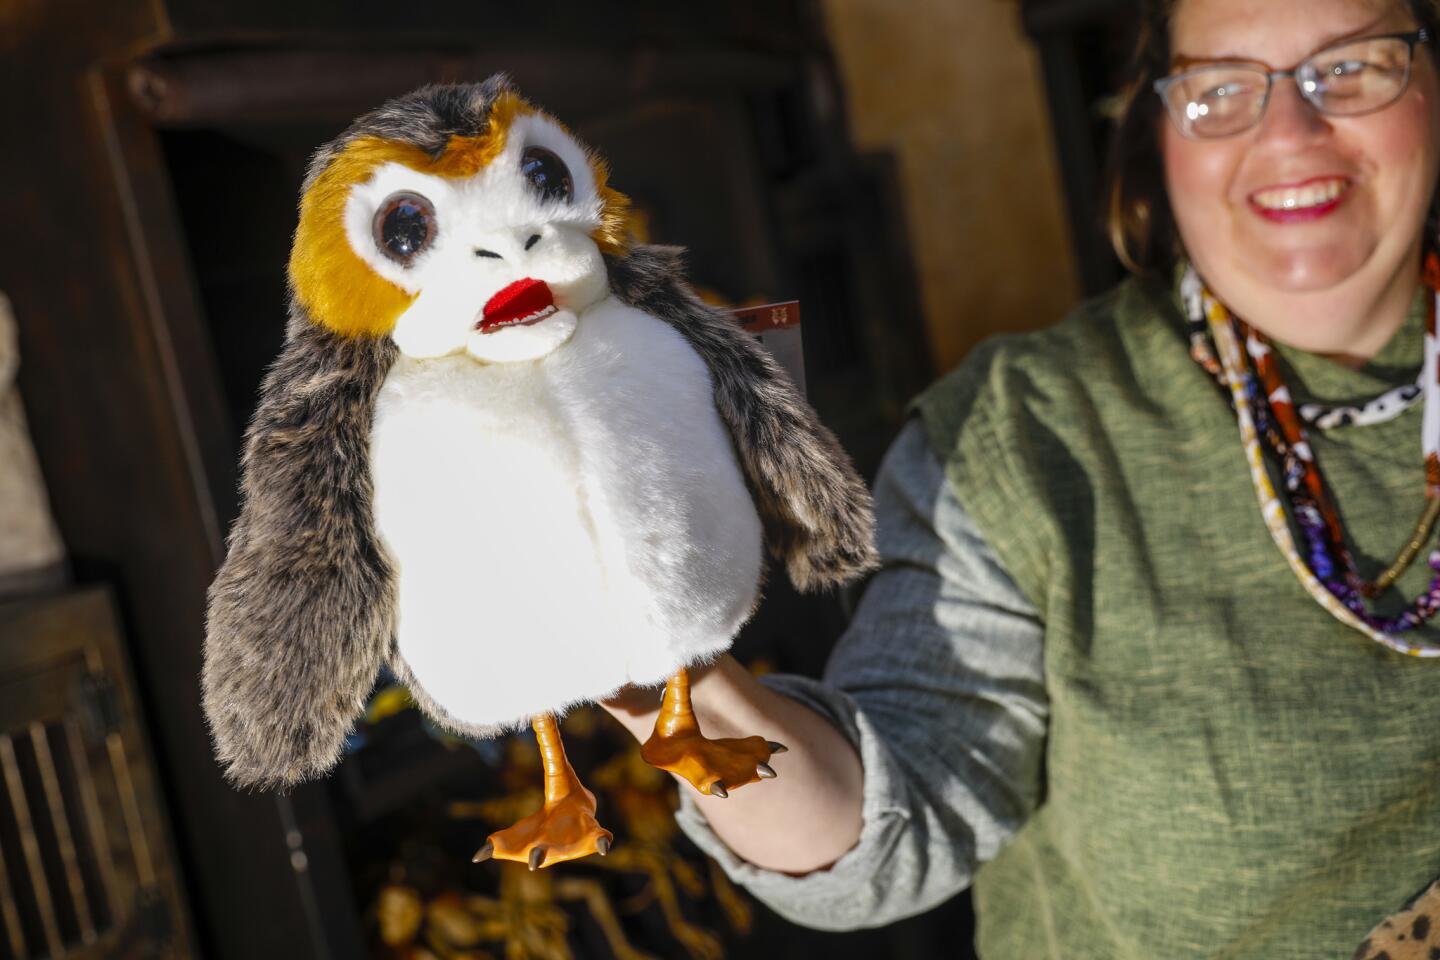 A Porg puppet, on sale for $44.99, at the Creature Stall inside the marketplace.